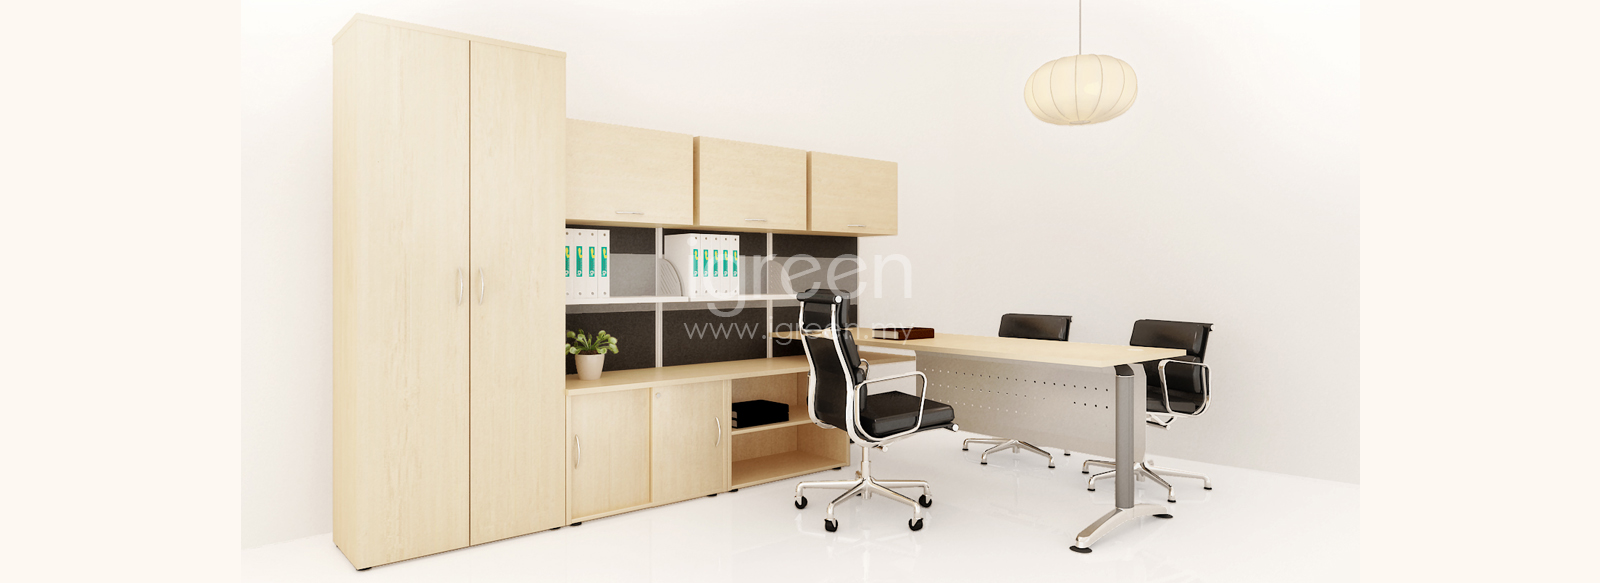 Tender Series Design Private Workstation Concept Malaysia